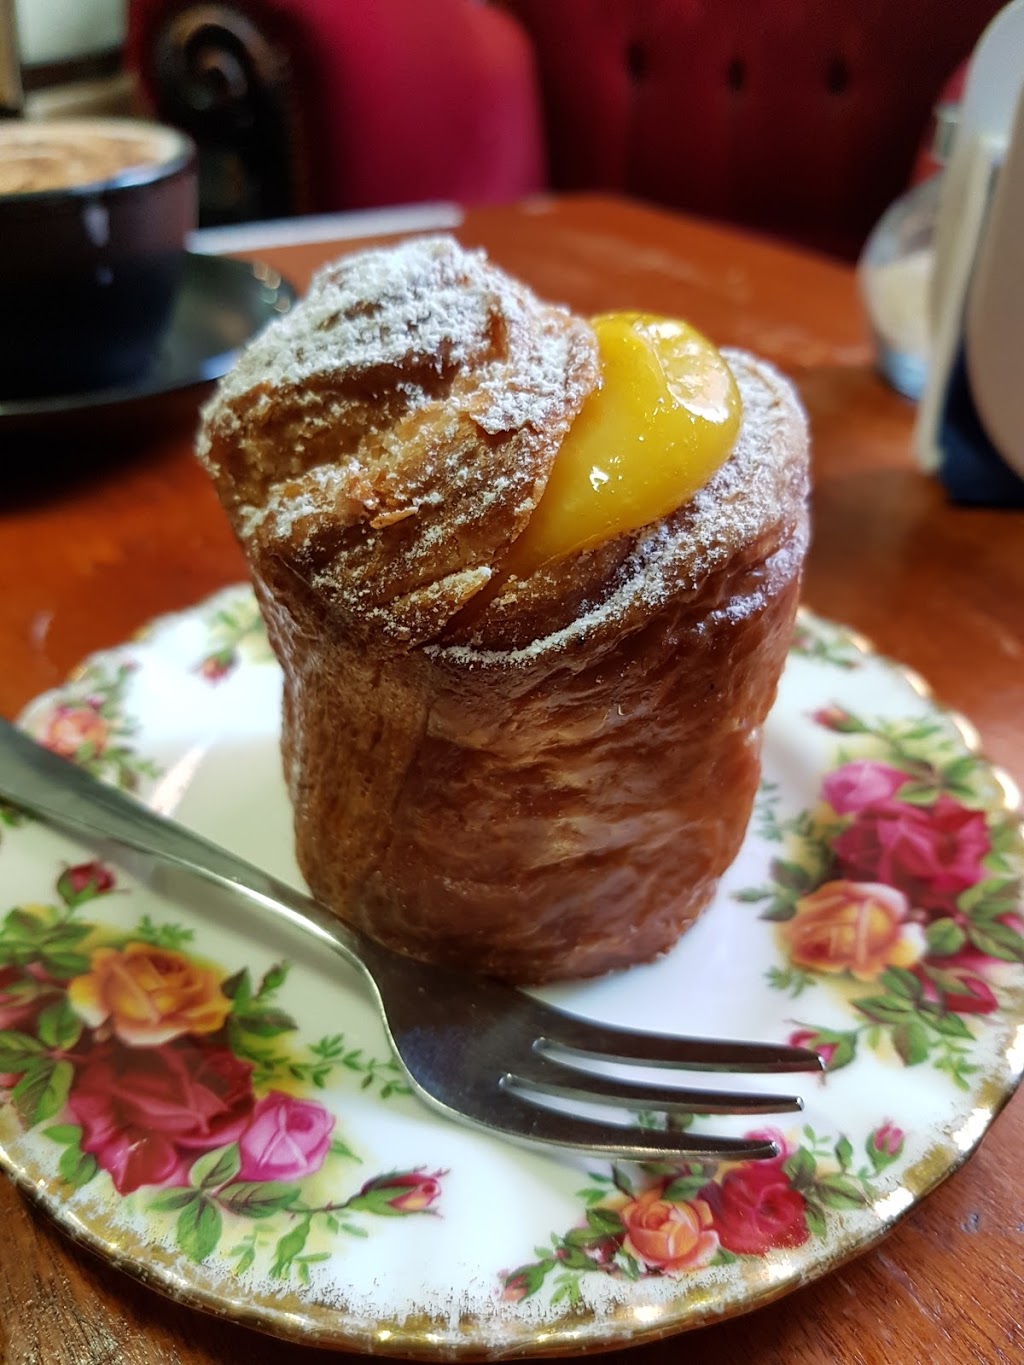 The Little French Cafe | cafe | 54/56 Belford St, Broadmeadow NSW 2292, Australia | 0455196070 OR +61 455 196 070